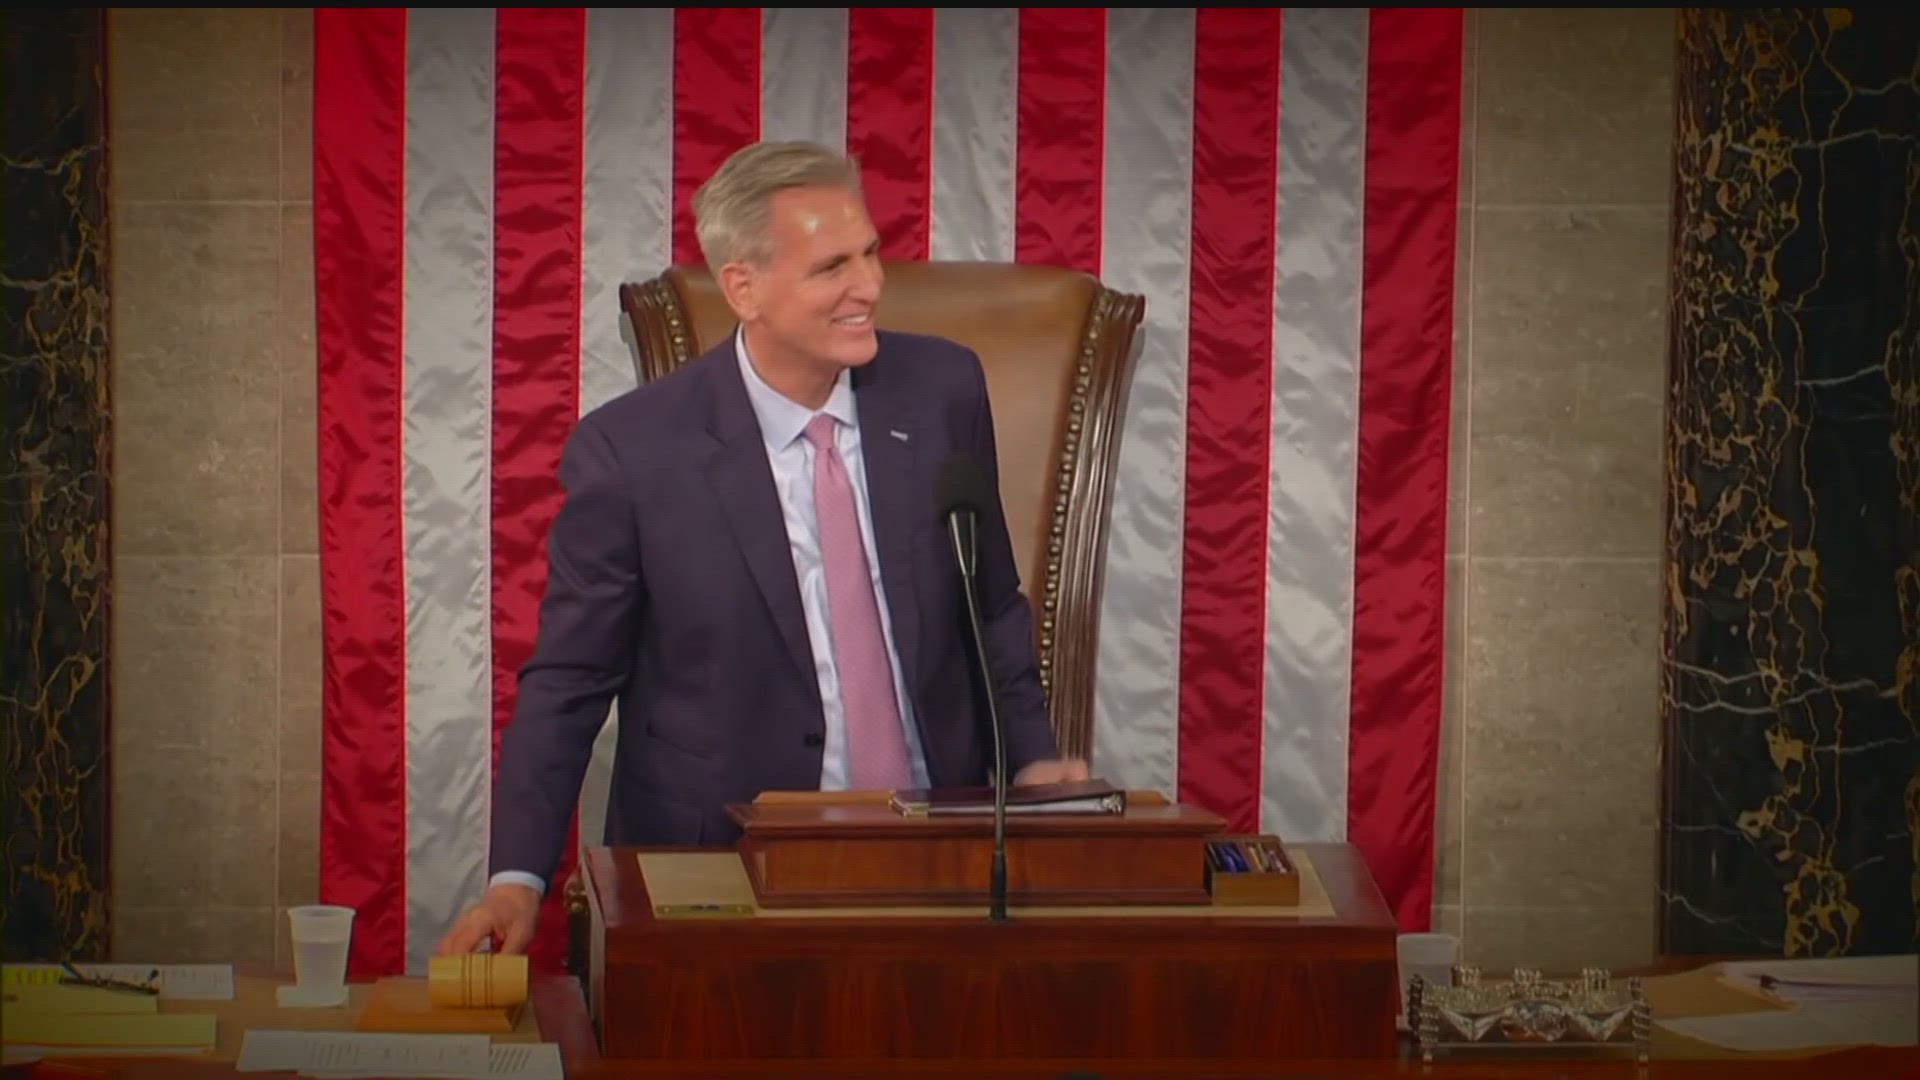 Minnesota lawmakers respond the House's historic vote to remove Rep. Kevin McCarthy as the speaker.